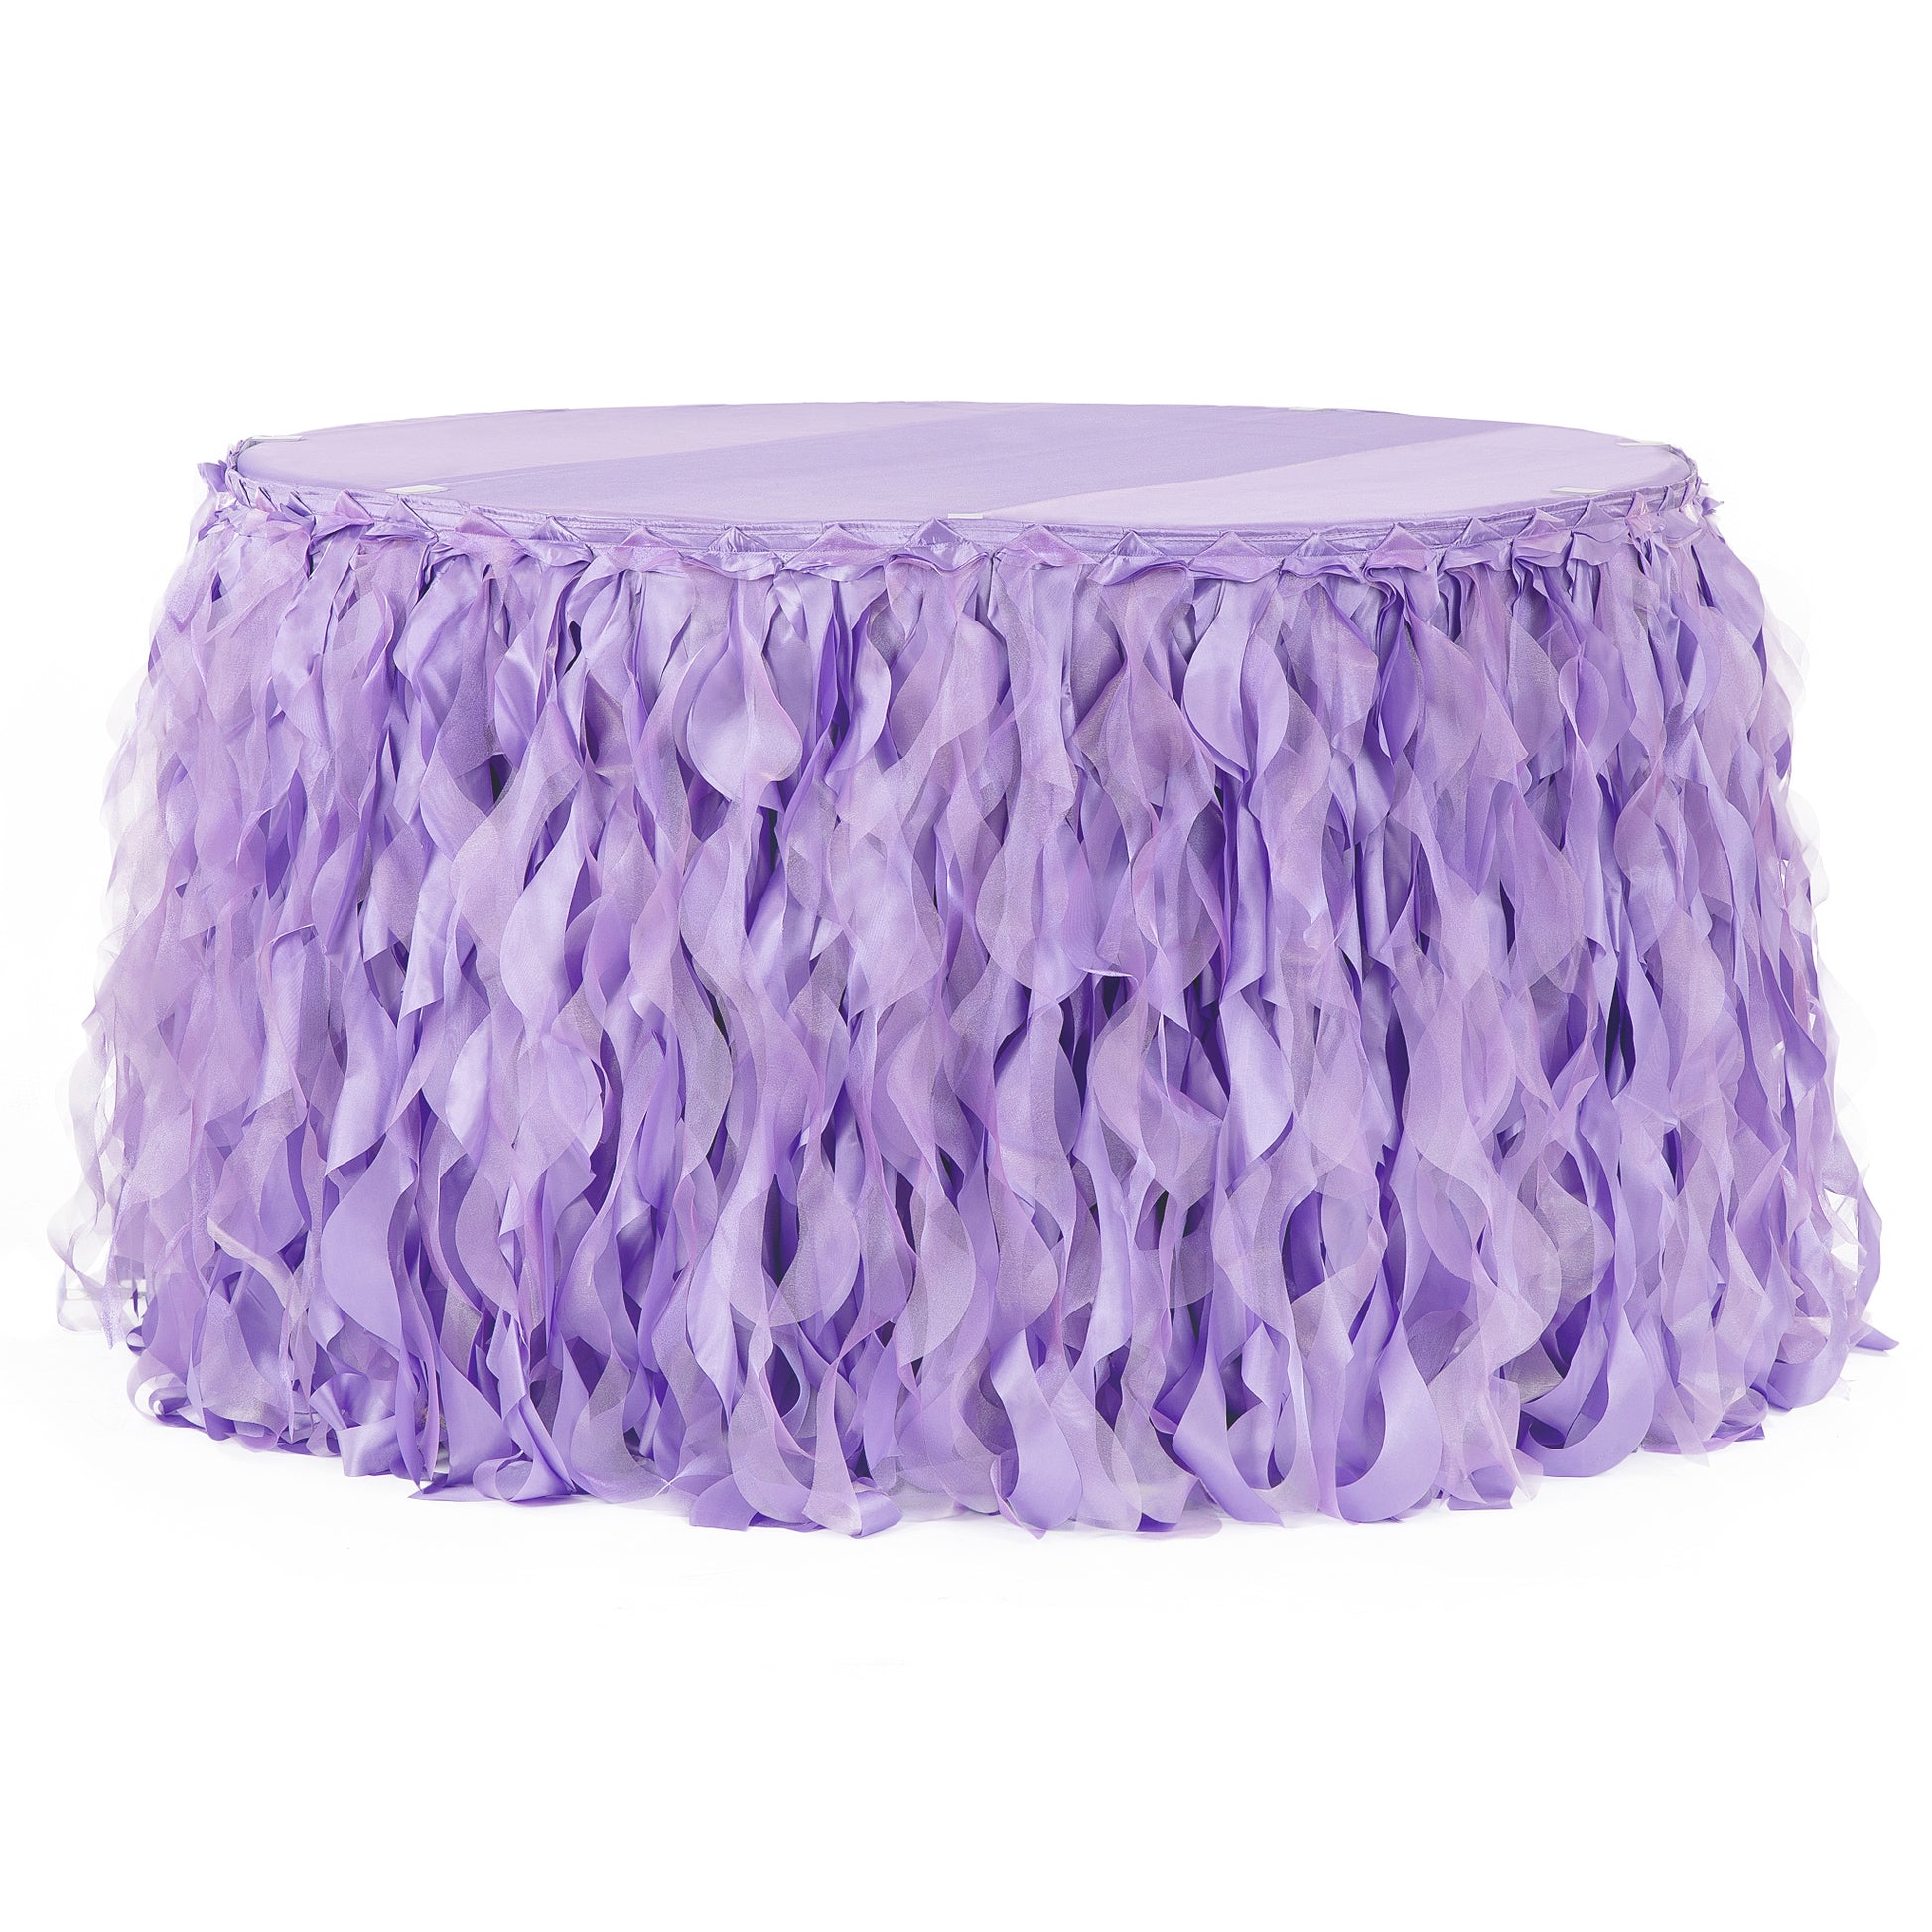 Curly Willow 17ft Table Skirt - Victorian Lilac/Wisteria - CV Linens